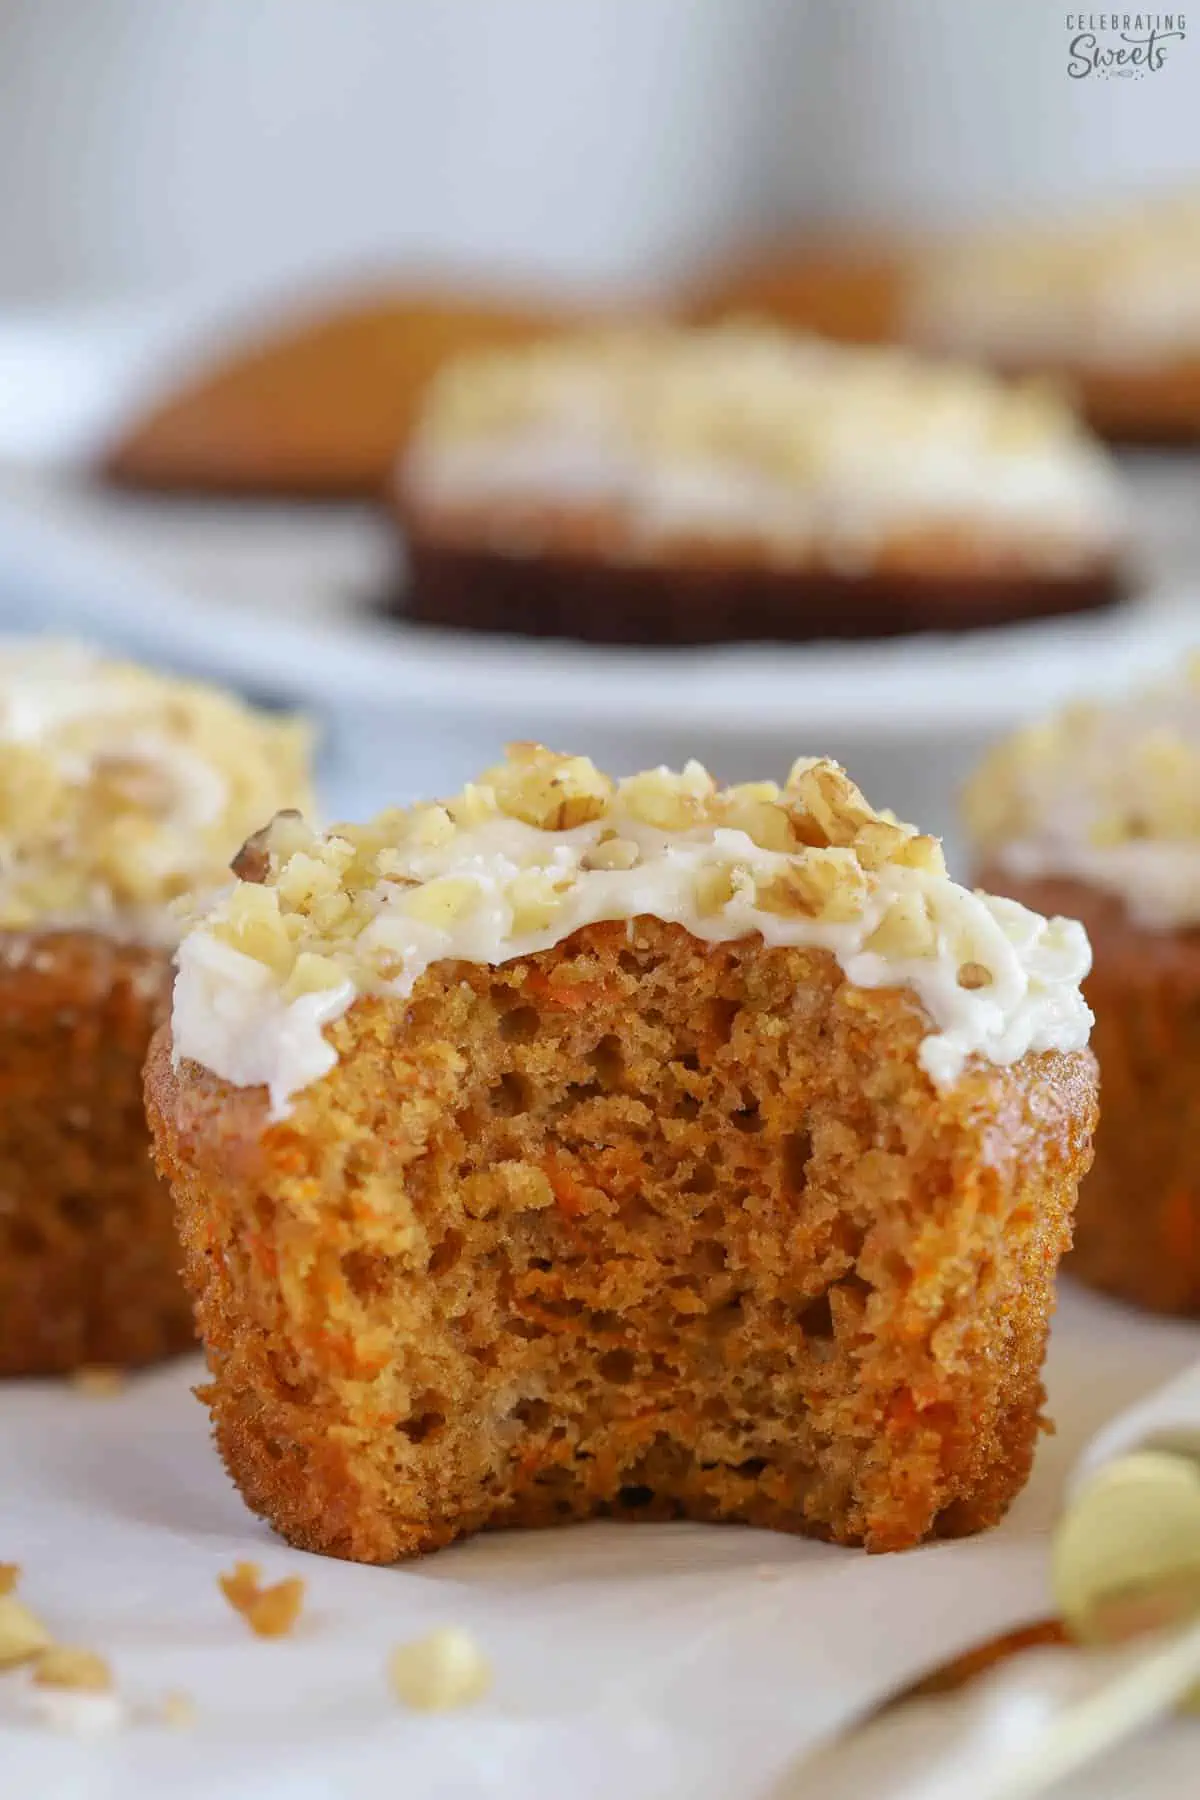 Carrot muffin with a large bite taken out of it.